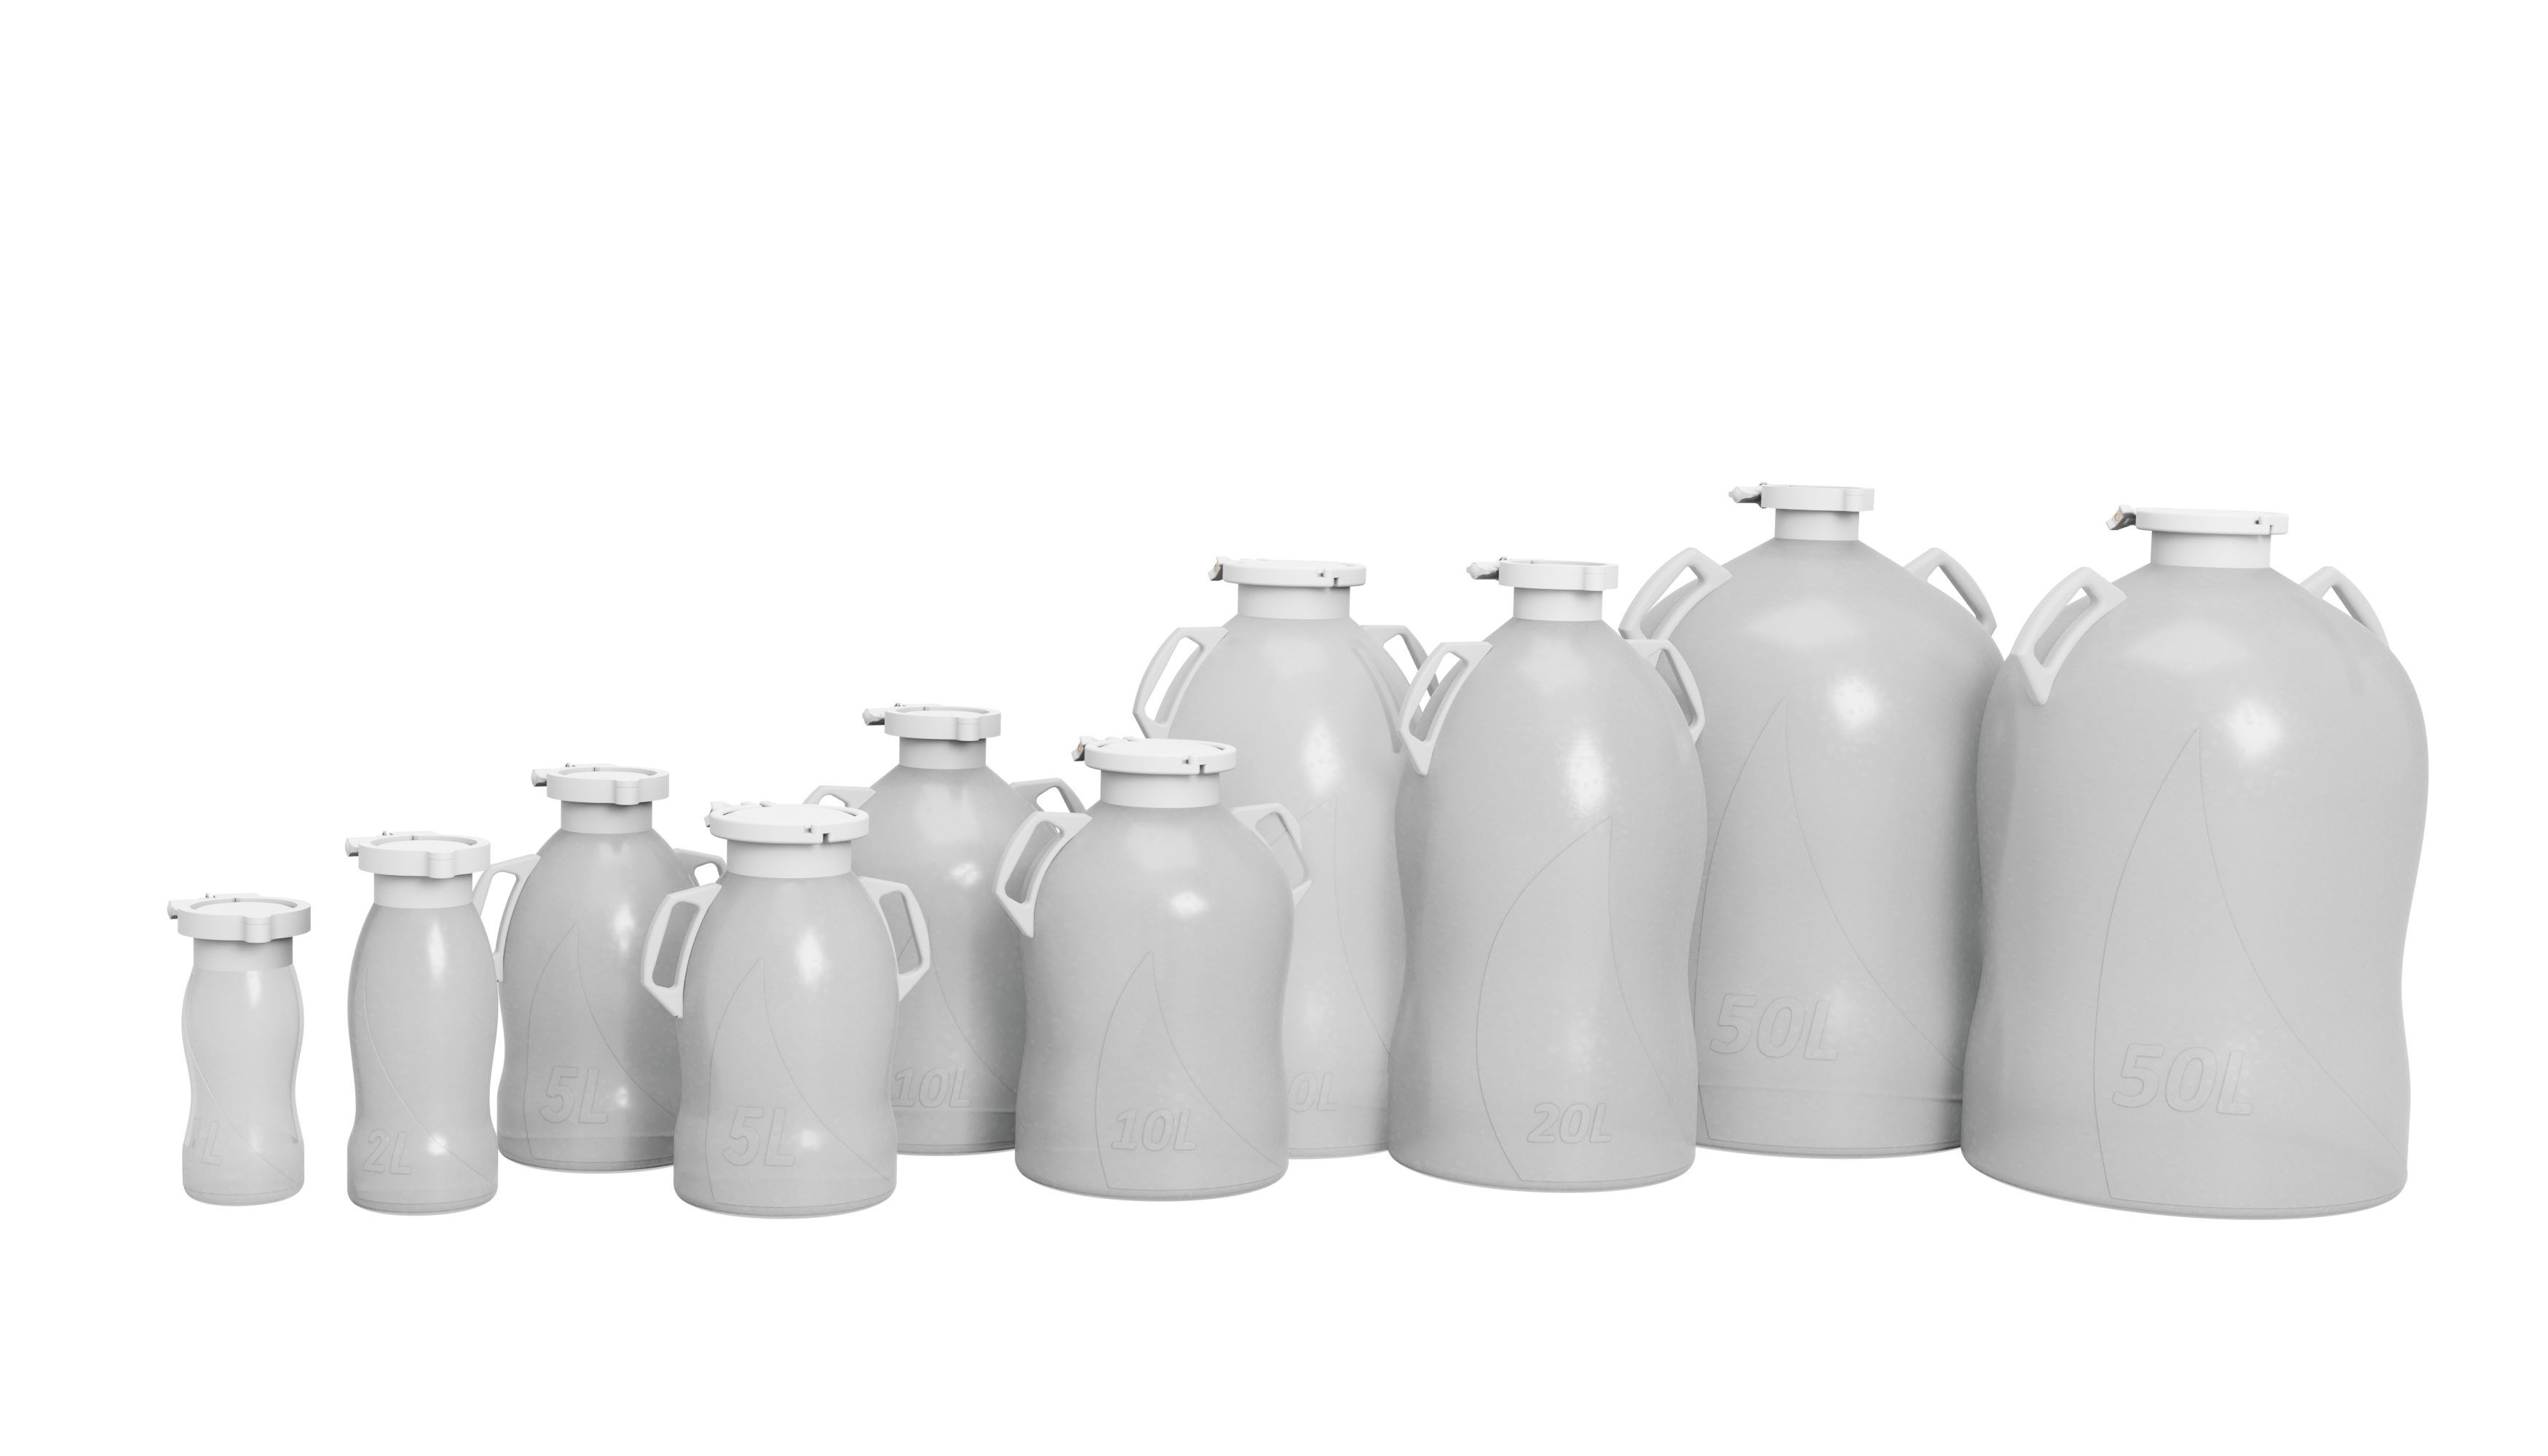 Single-use polypropylene bottles and carboys designed for bioprocessing, available in sizes from 1 liter to 50 liter with customizable handles, ports, and dip tubes. 